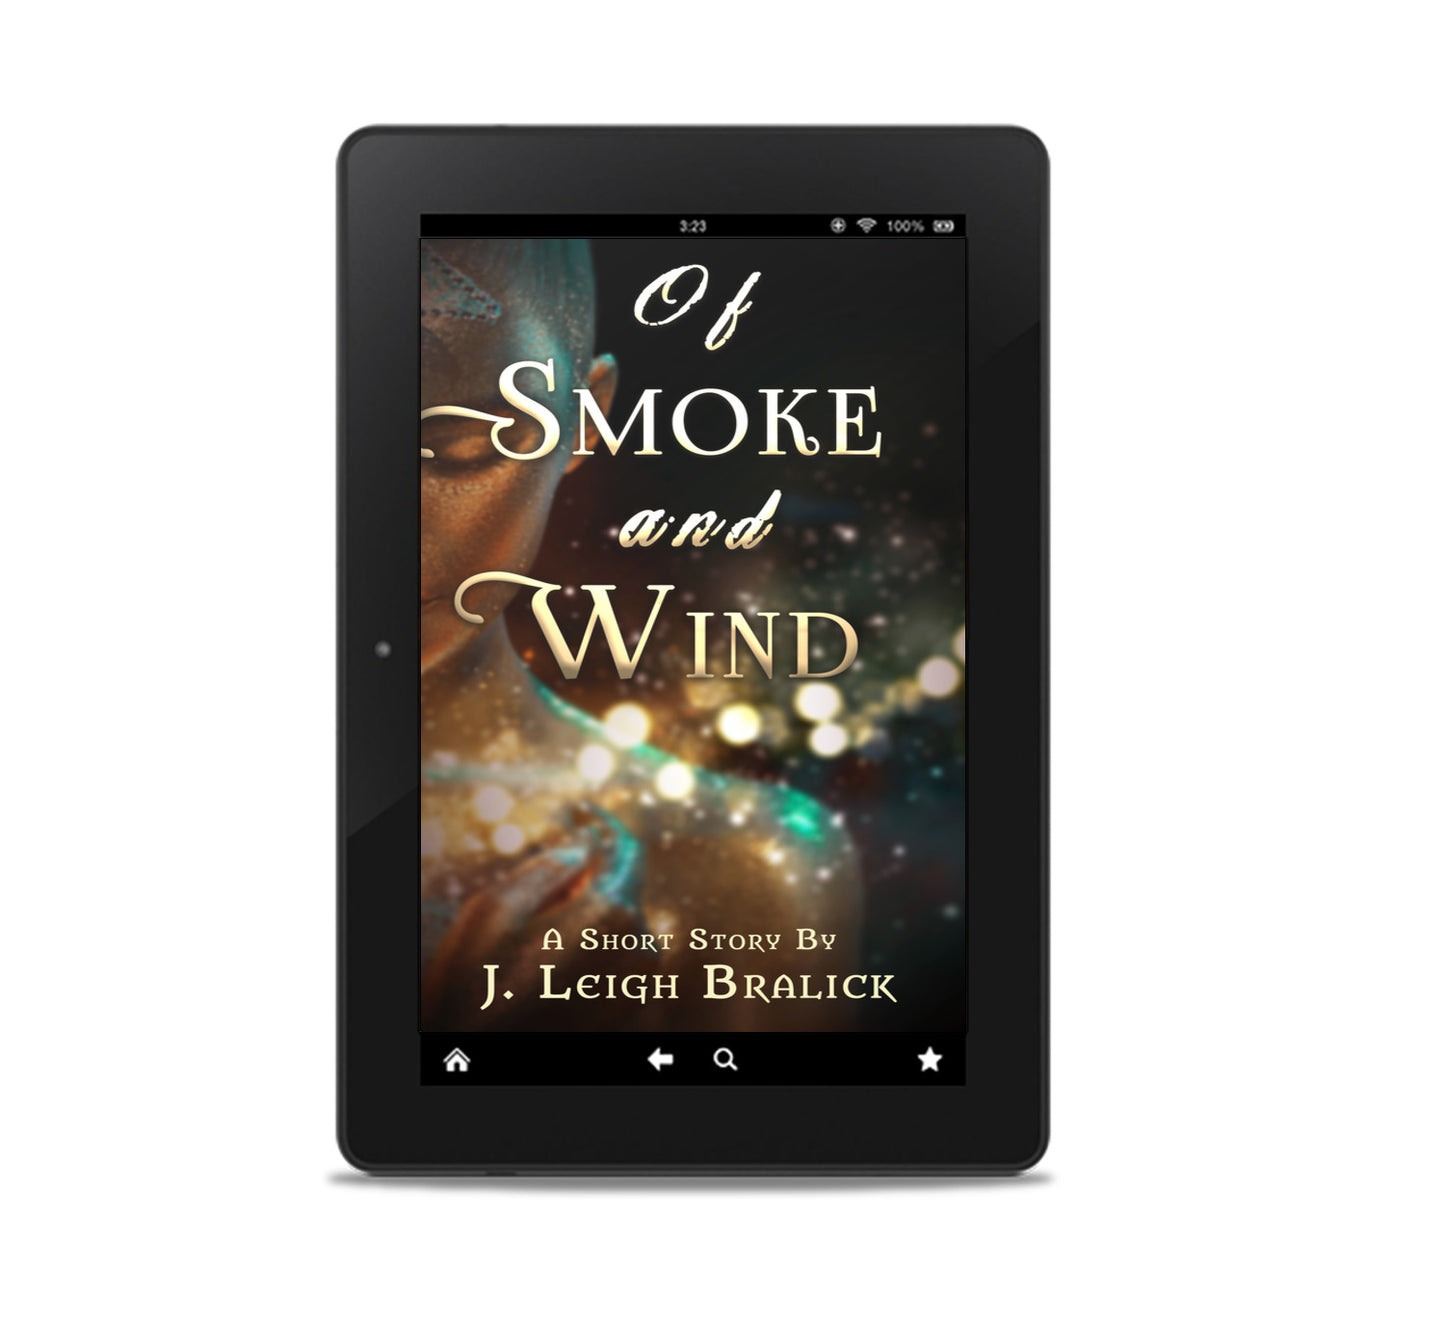 Of Smoke and Wind (Short Story)